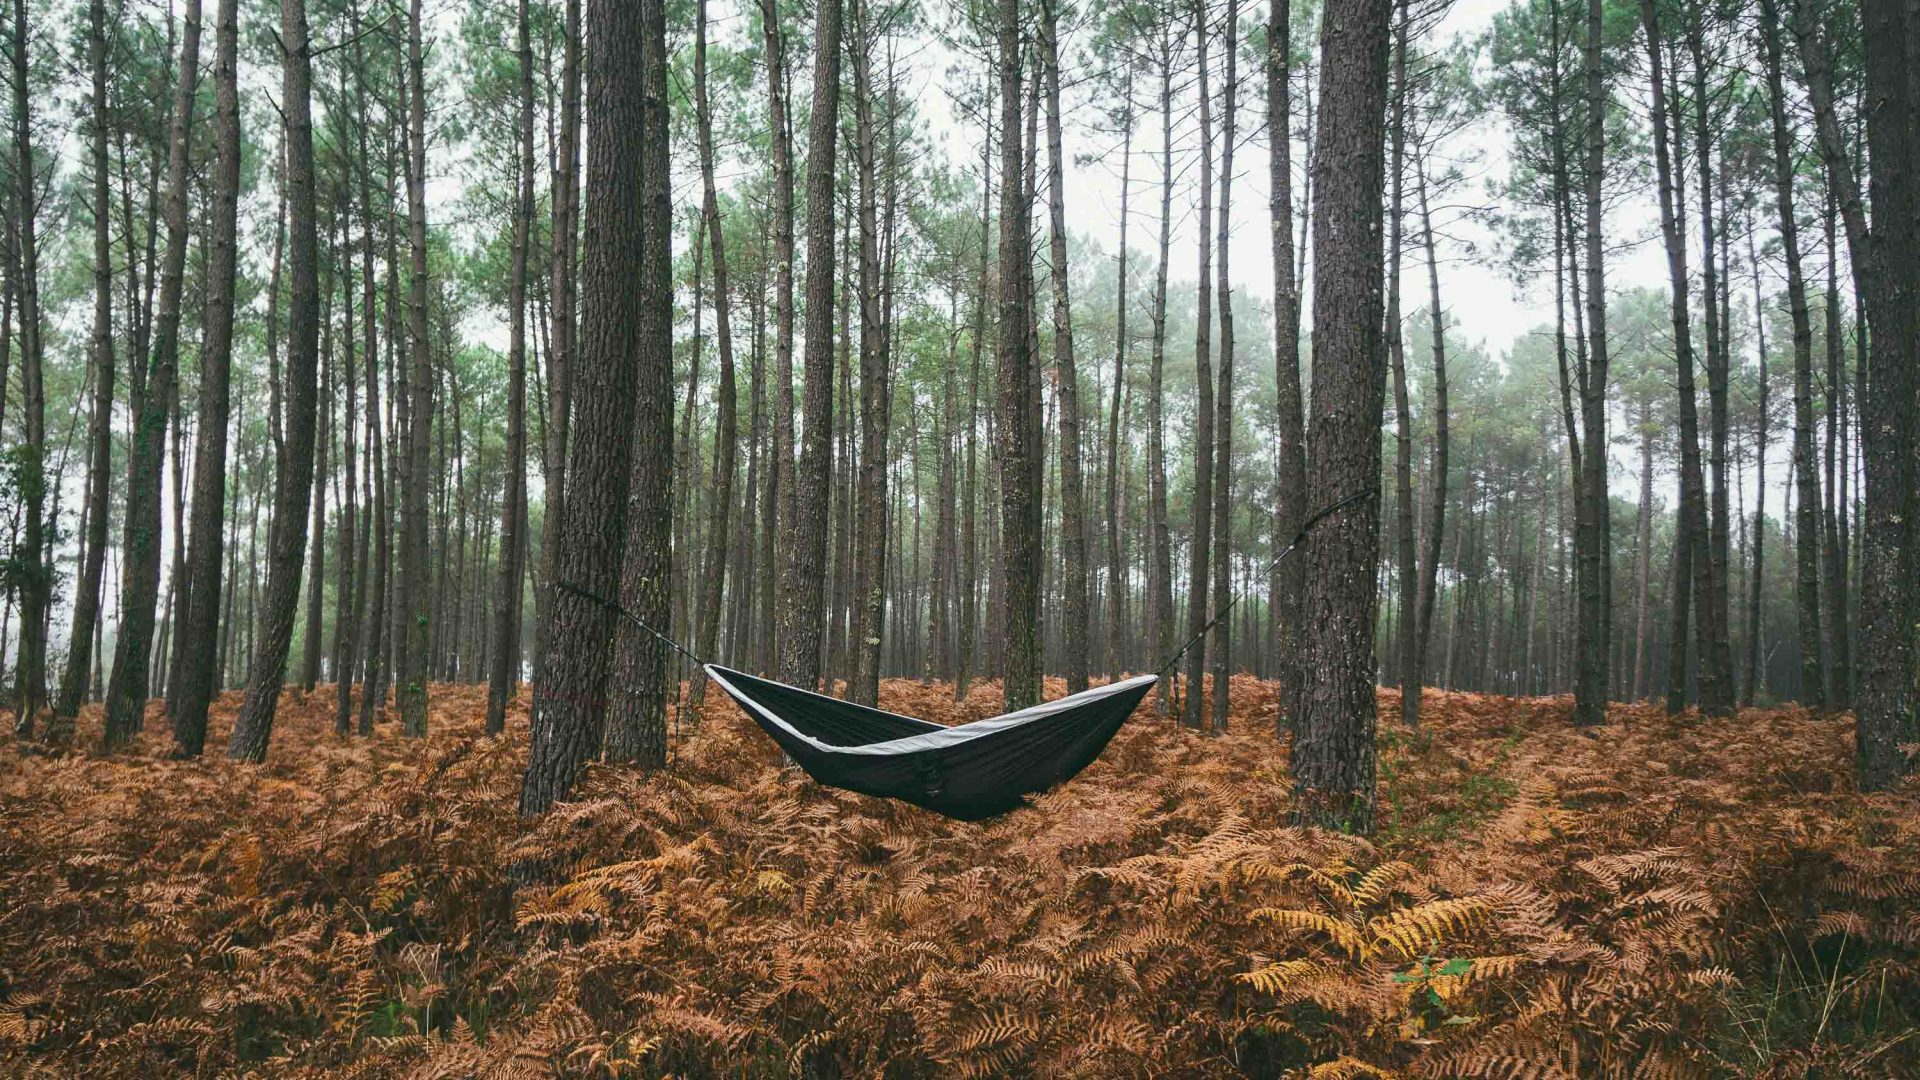 A lone hammock hangs from trees in a forest.